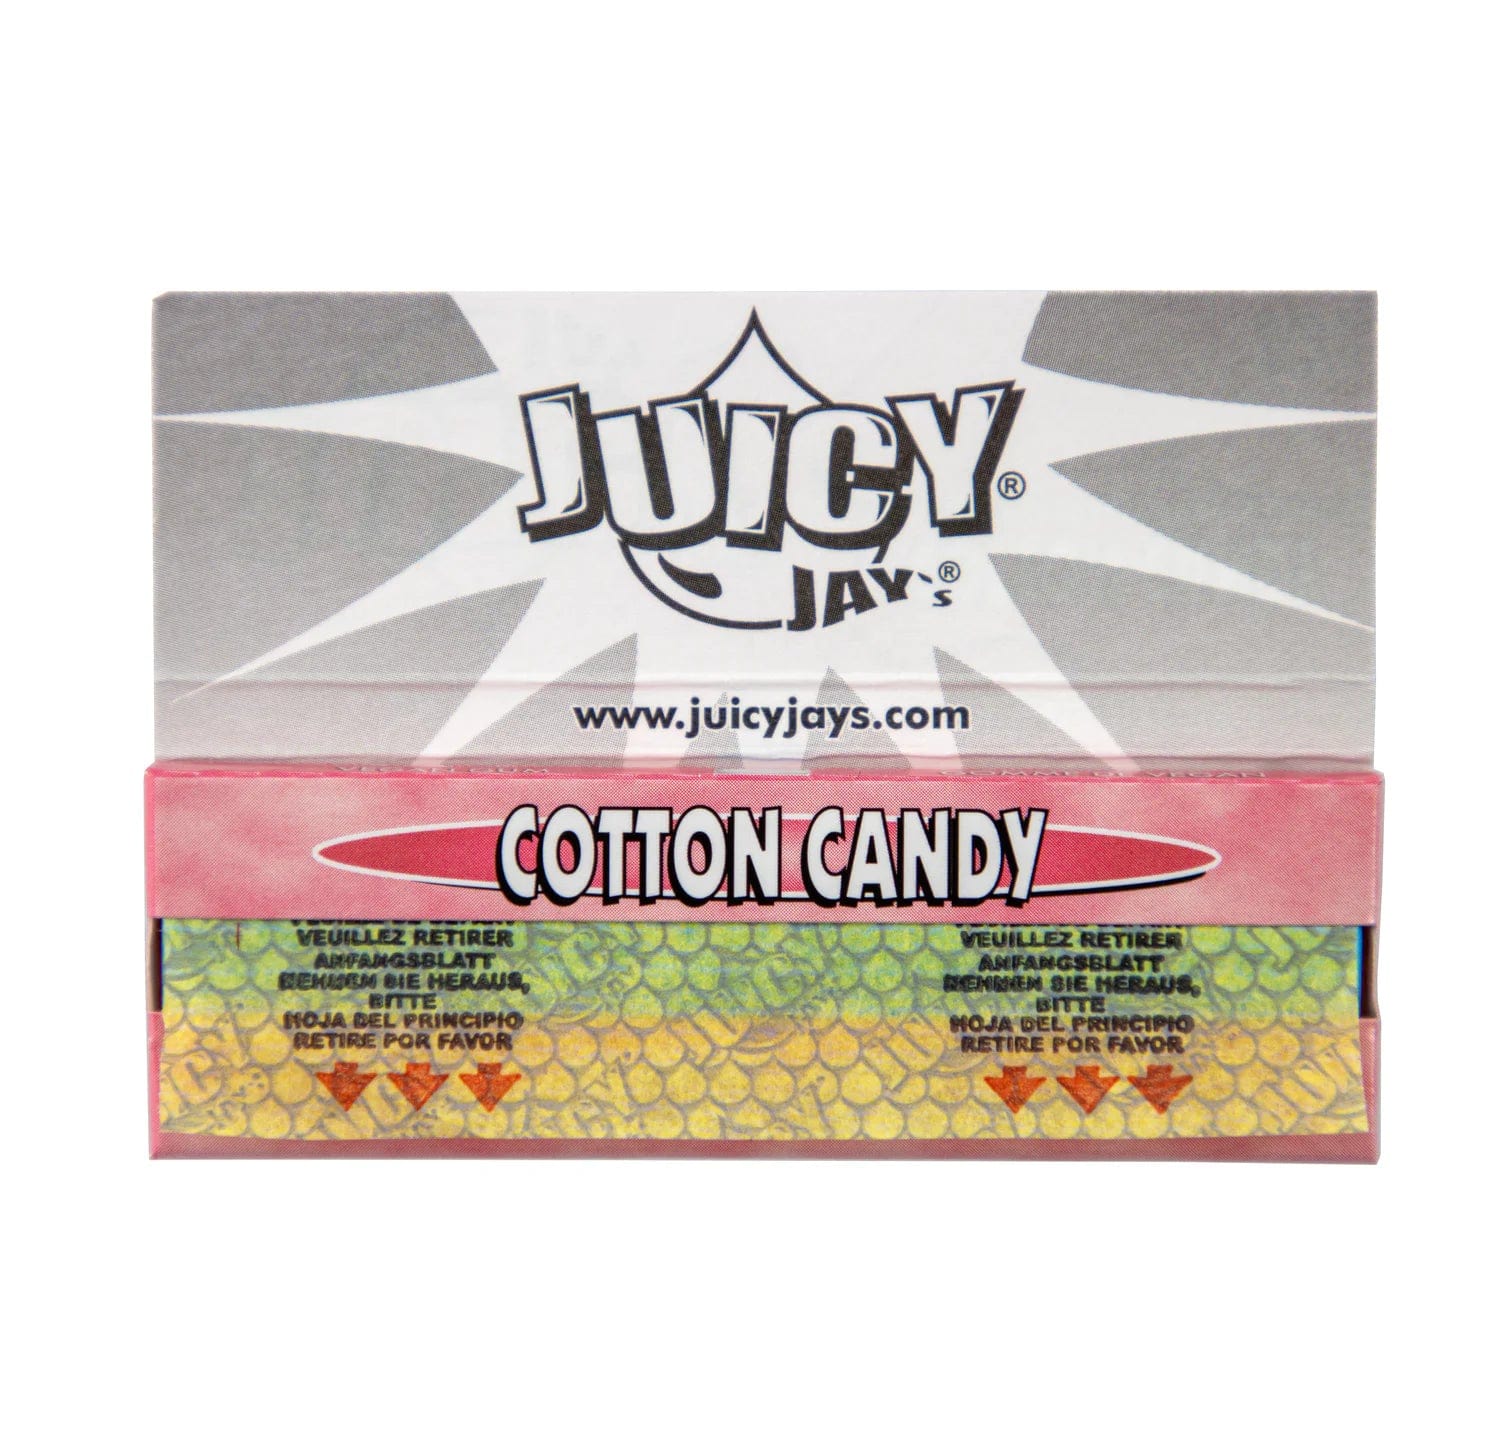 Juicy Jay's Cotton Candy (1 1/4)